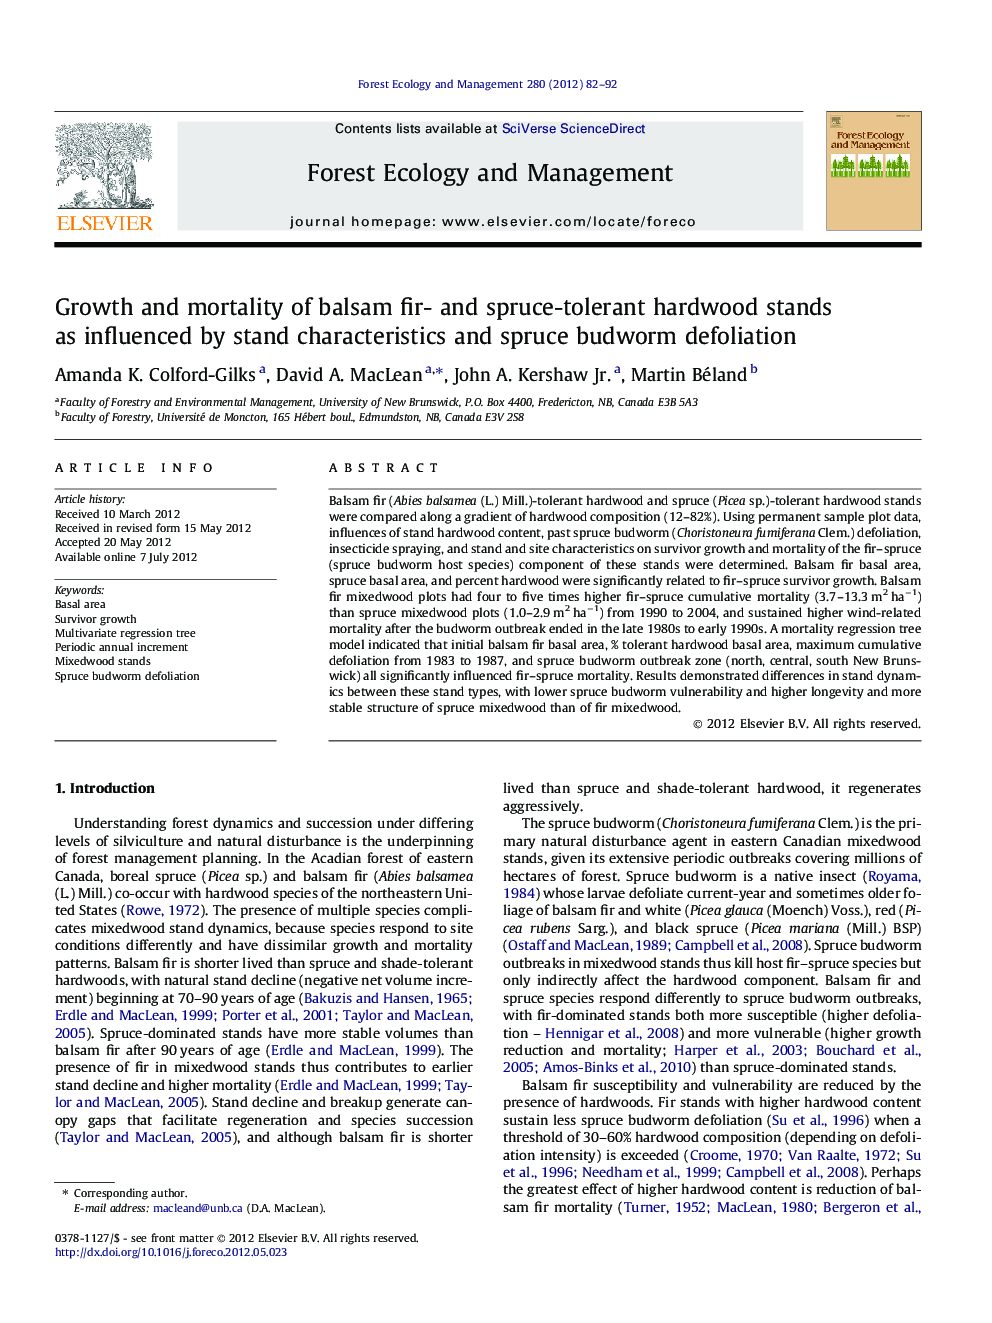 Growth and mortality of balsam fir- and spruce-tolerant hardwood stands as influenced by stand characteristics and spruce budworm defoliation